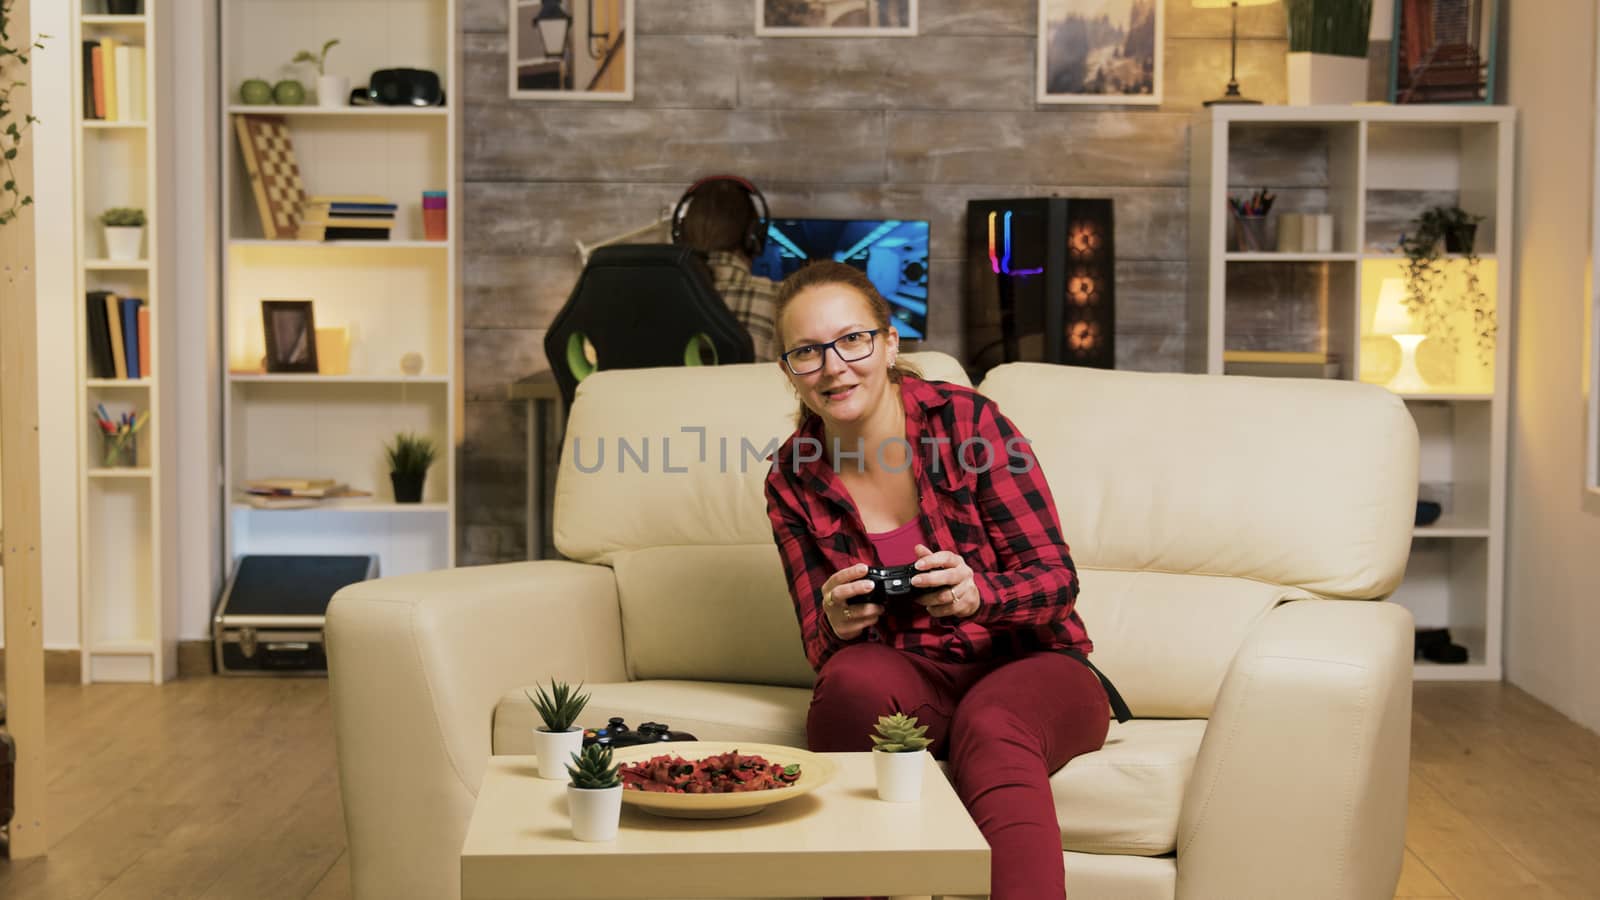 Young woman excited after her victory while playing video games in living room using wireless controller. Boyfriend in the background.